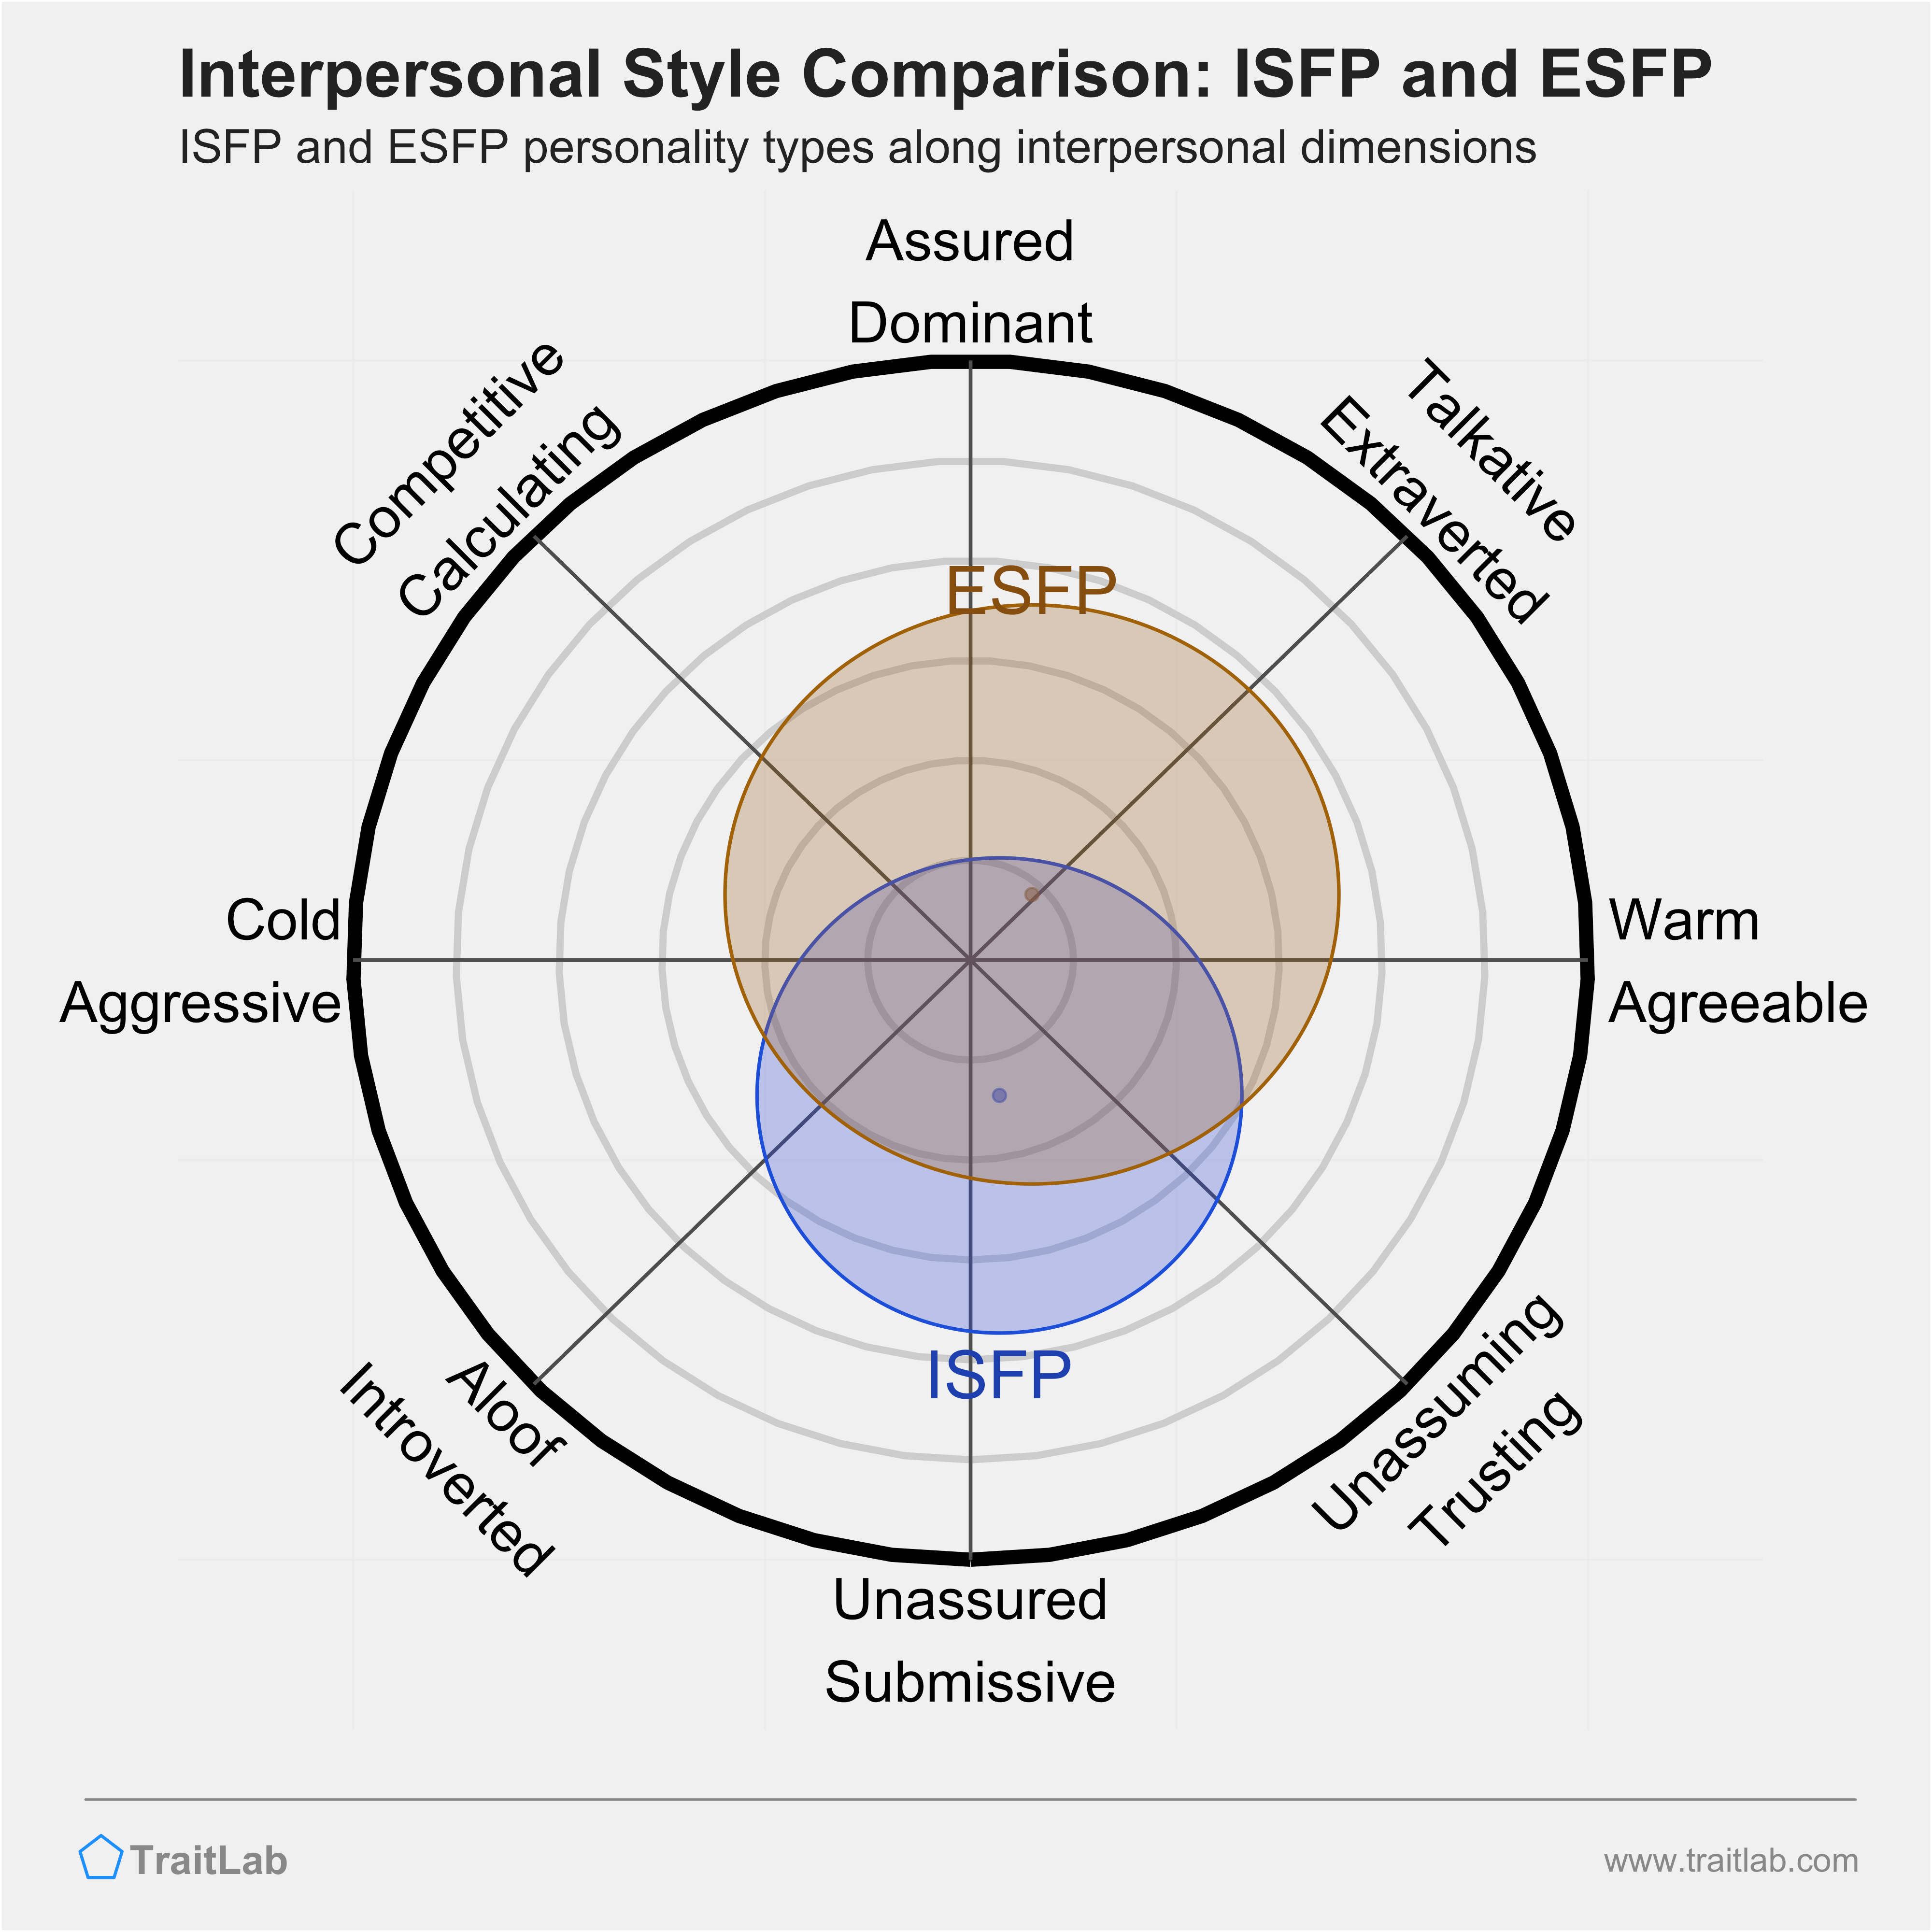 ISFP and ESFP comparison across interpersonal dimensions